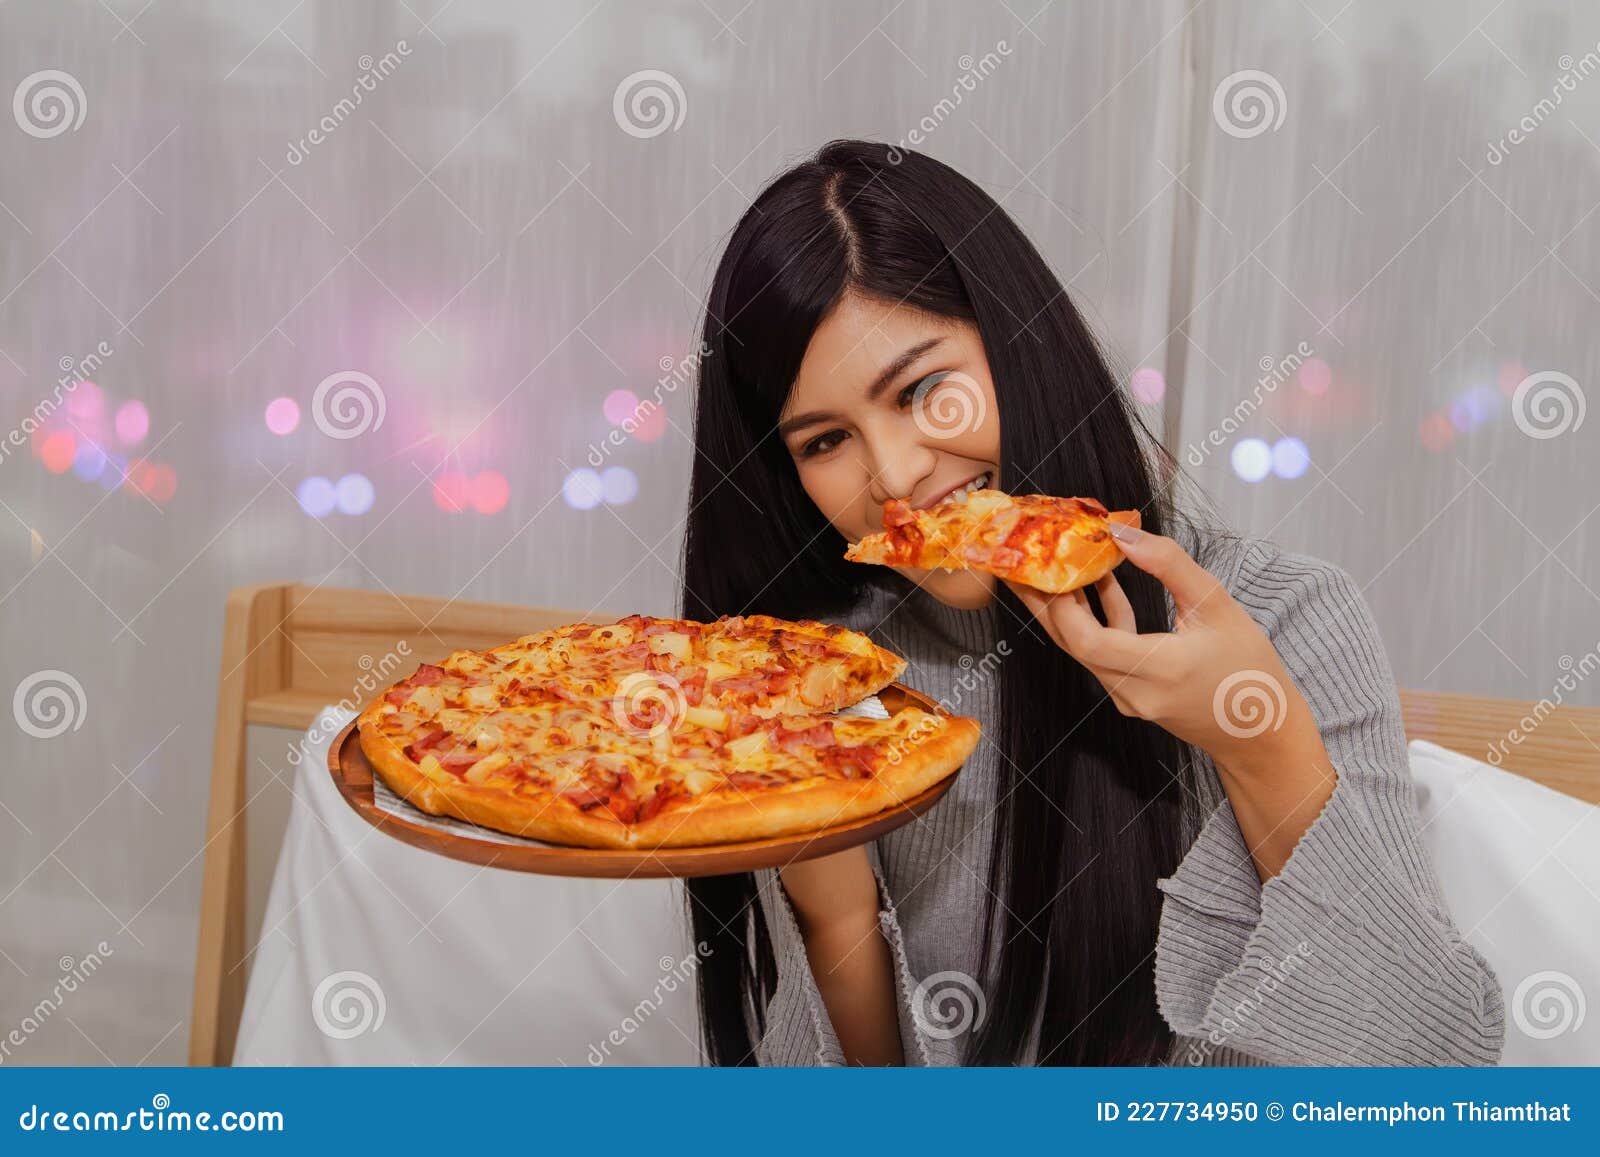 Beautiful And Delicious Asian Girl Sits And Looks At Pizza She Likes